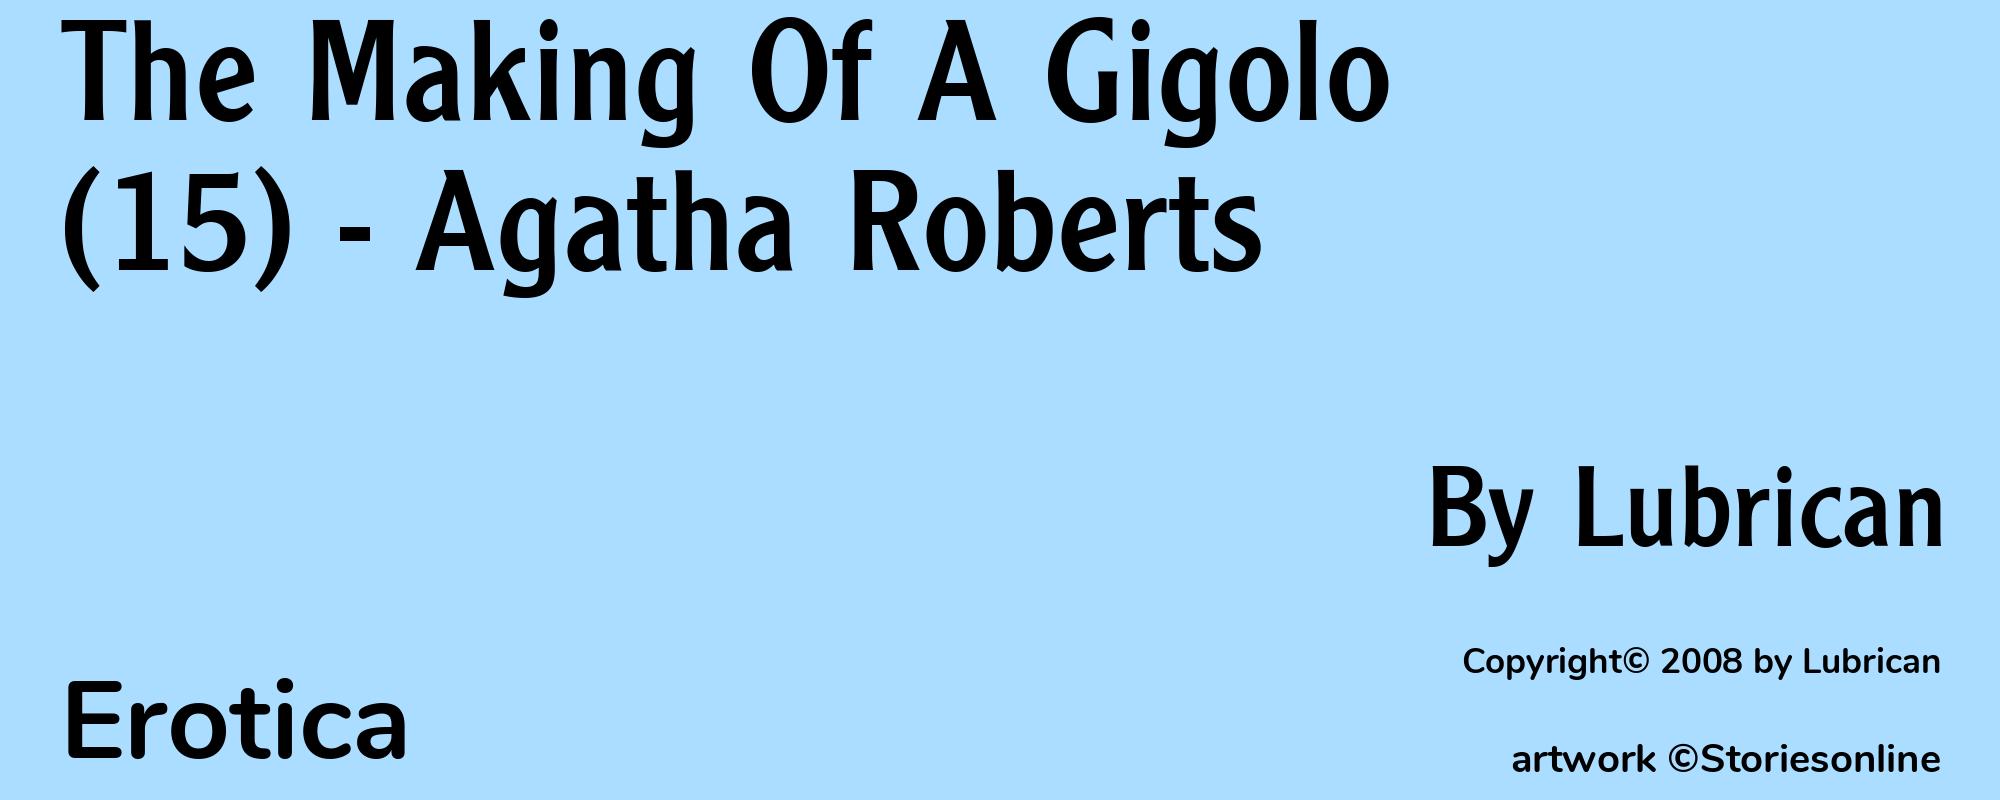 The Making Of A Gigolo (15) - Agatha Roberts - Cover